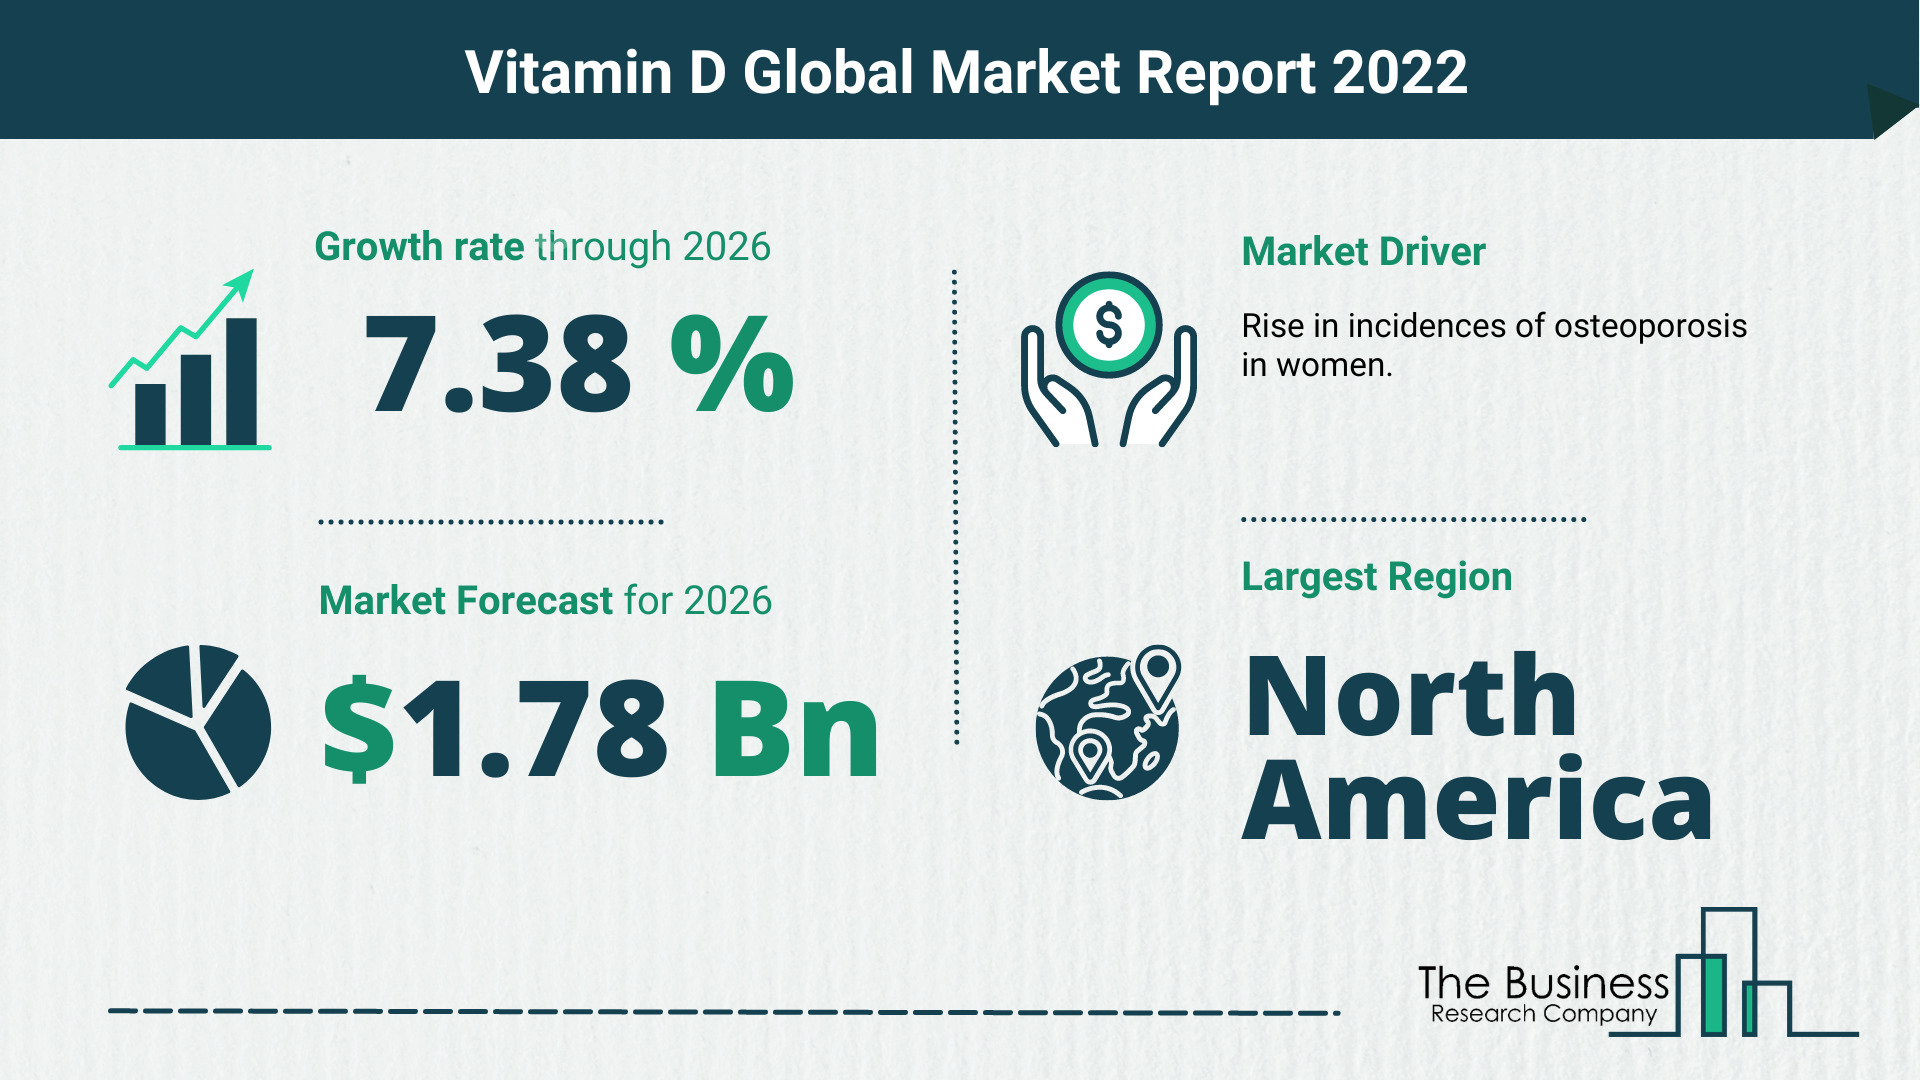 What Is The Vitamin D Market Overview In 2022?